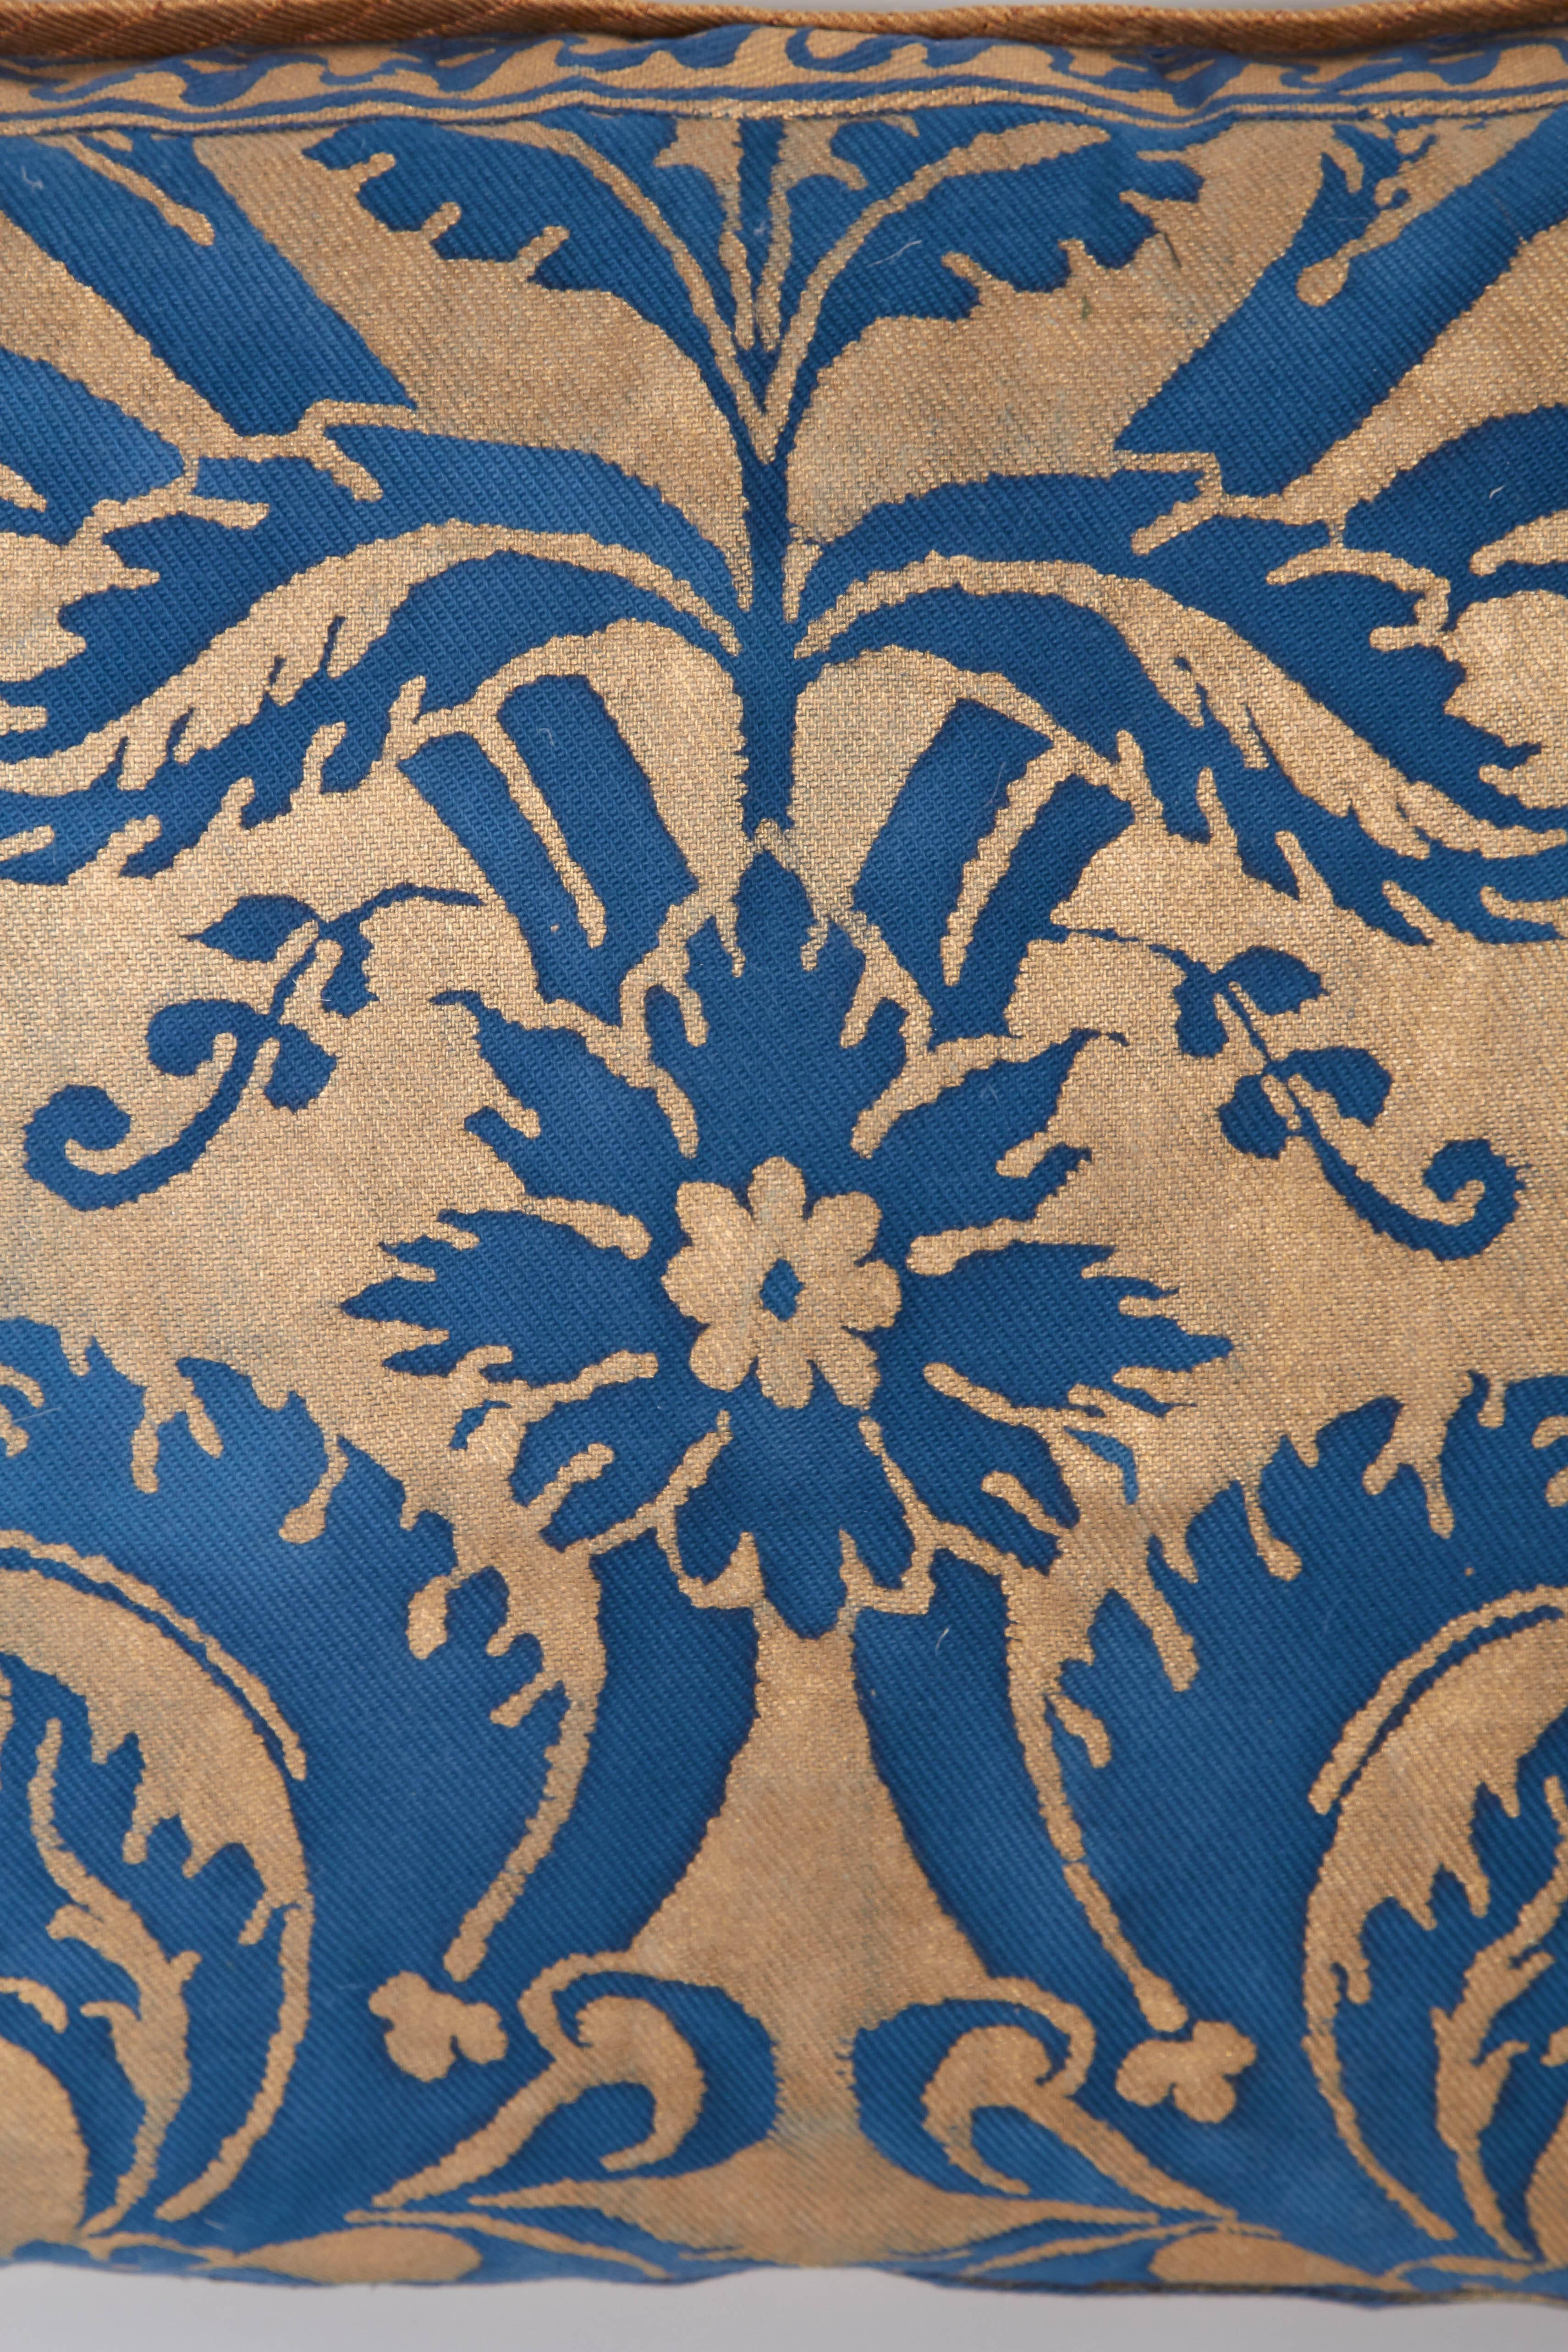 A Fortuny lumbar cushion in the DeMedici pattern, patinated blue on gold ground with stylized Fortuny fabric border, silk blend backing material with silk bias edging, the pattern, a 17th century Italian design named for the famous Florentine